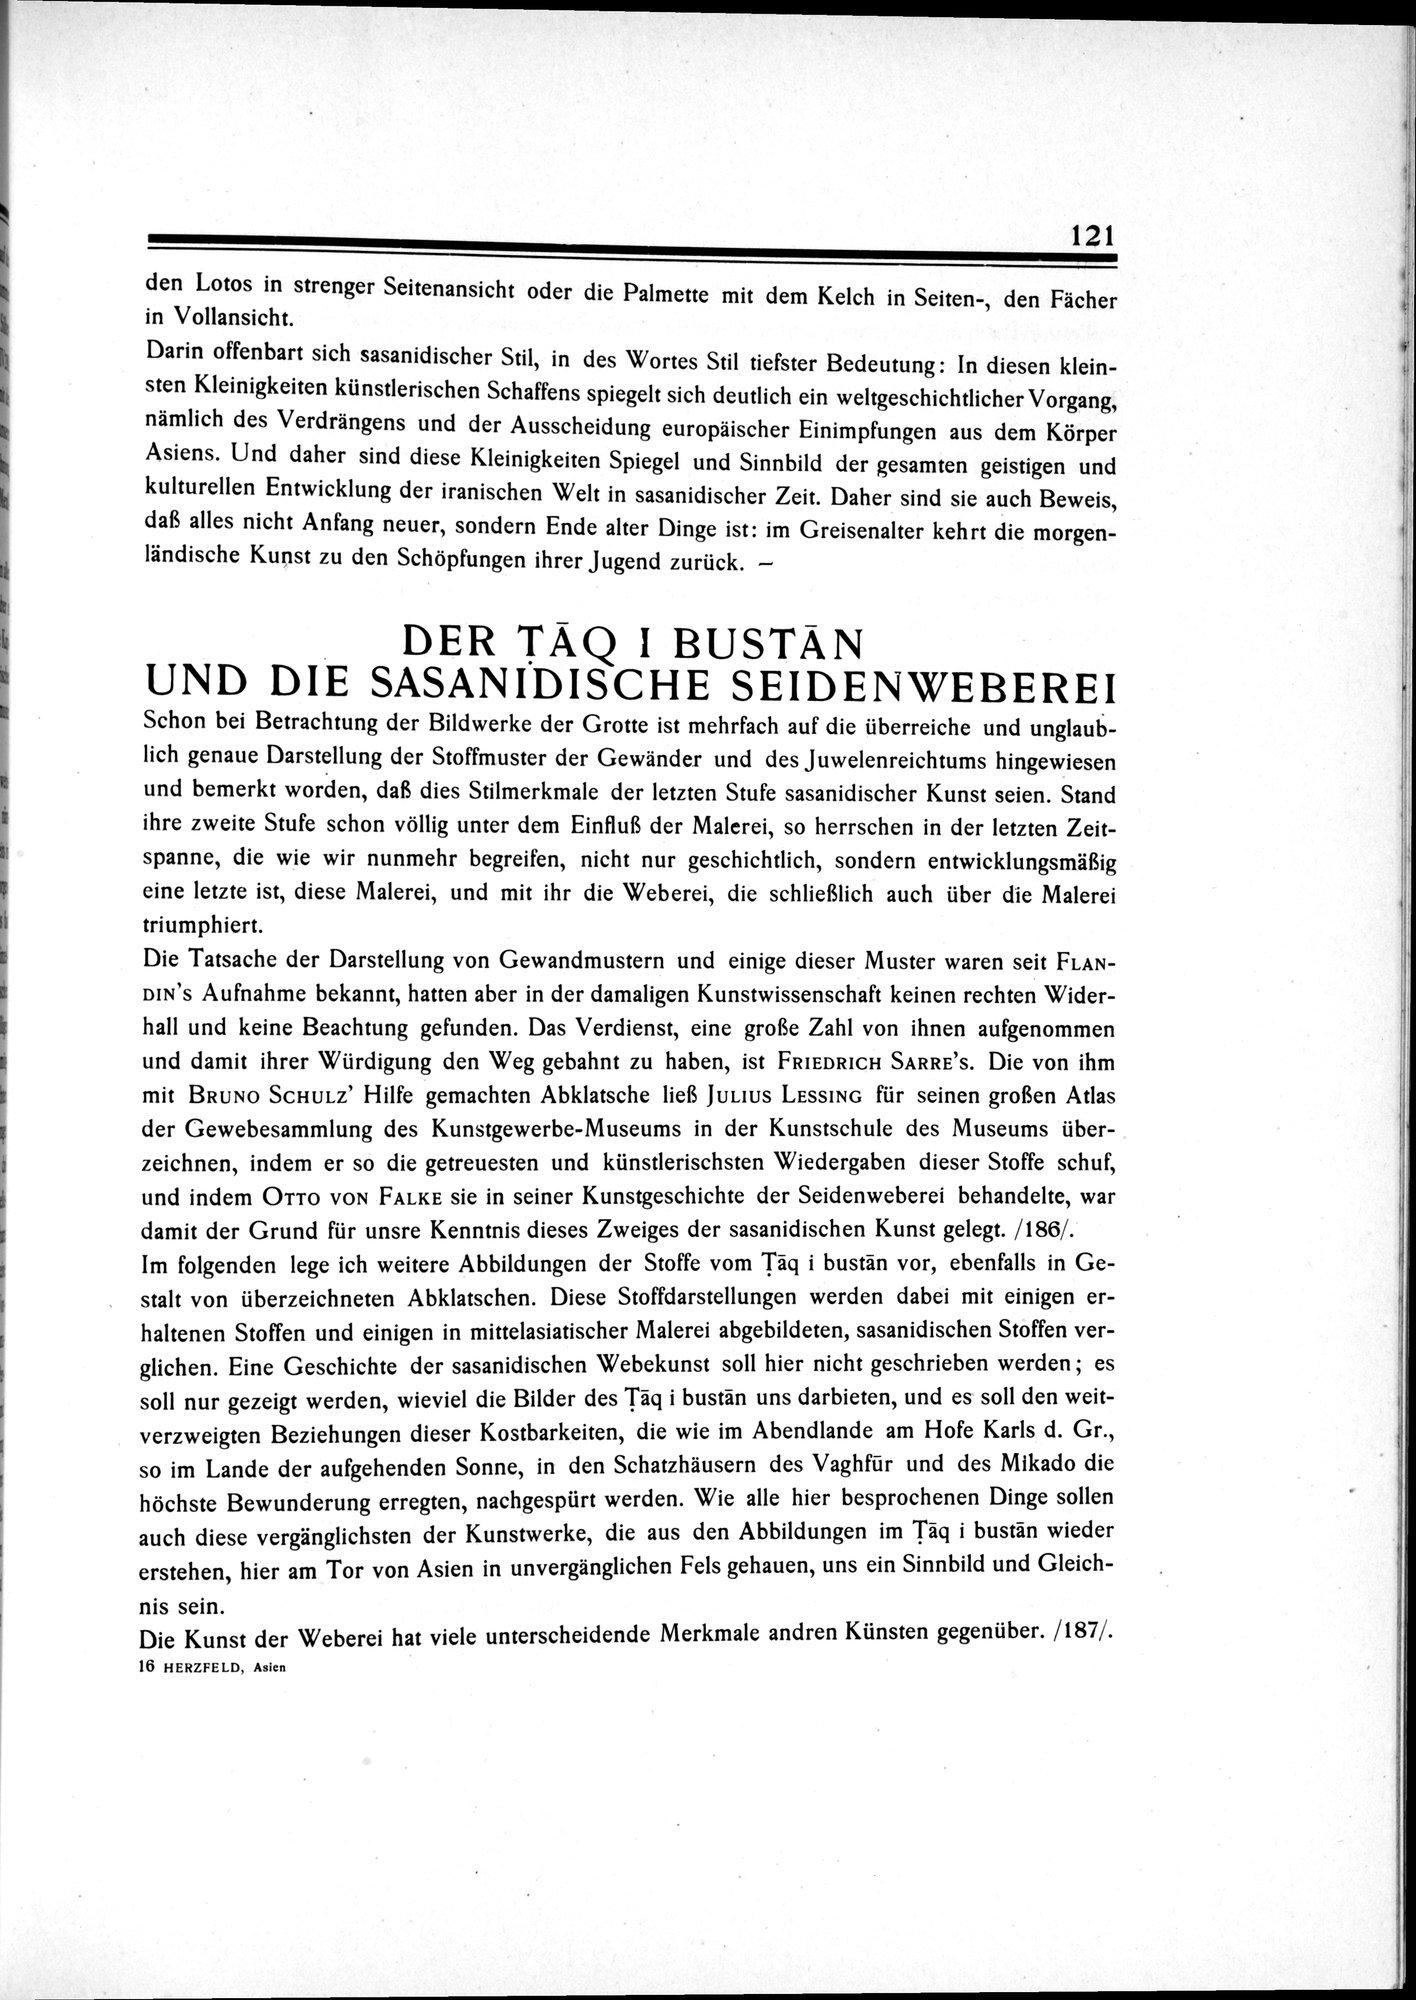 Am Tor von Asien : vol.1 / Page 139 (Grayscale High Resolution Image)